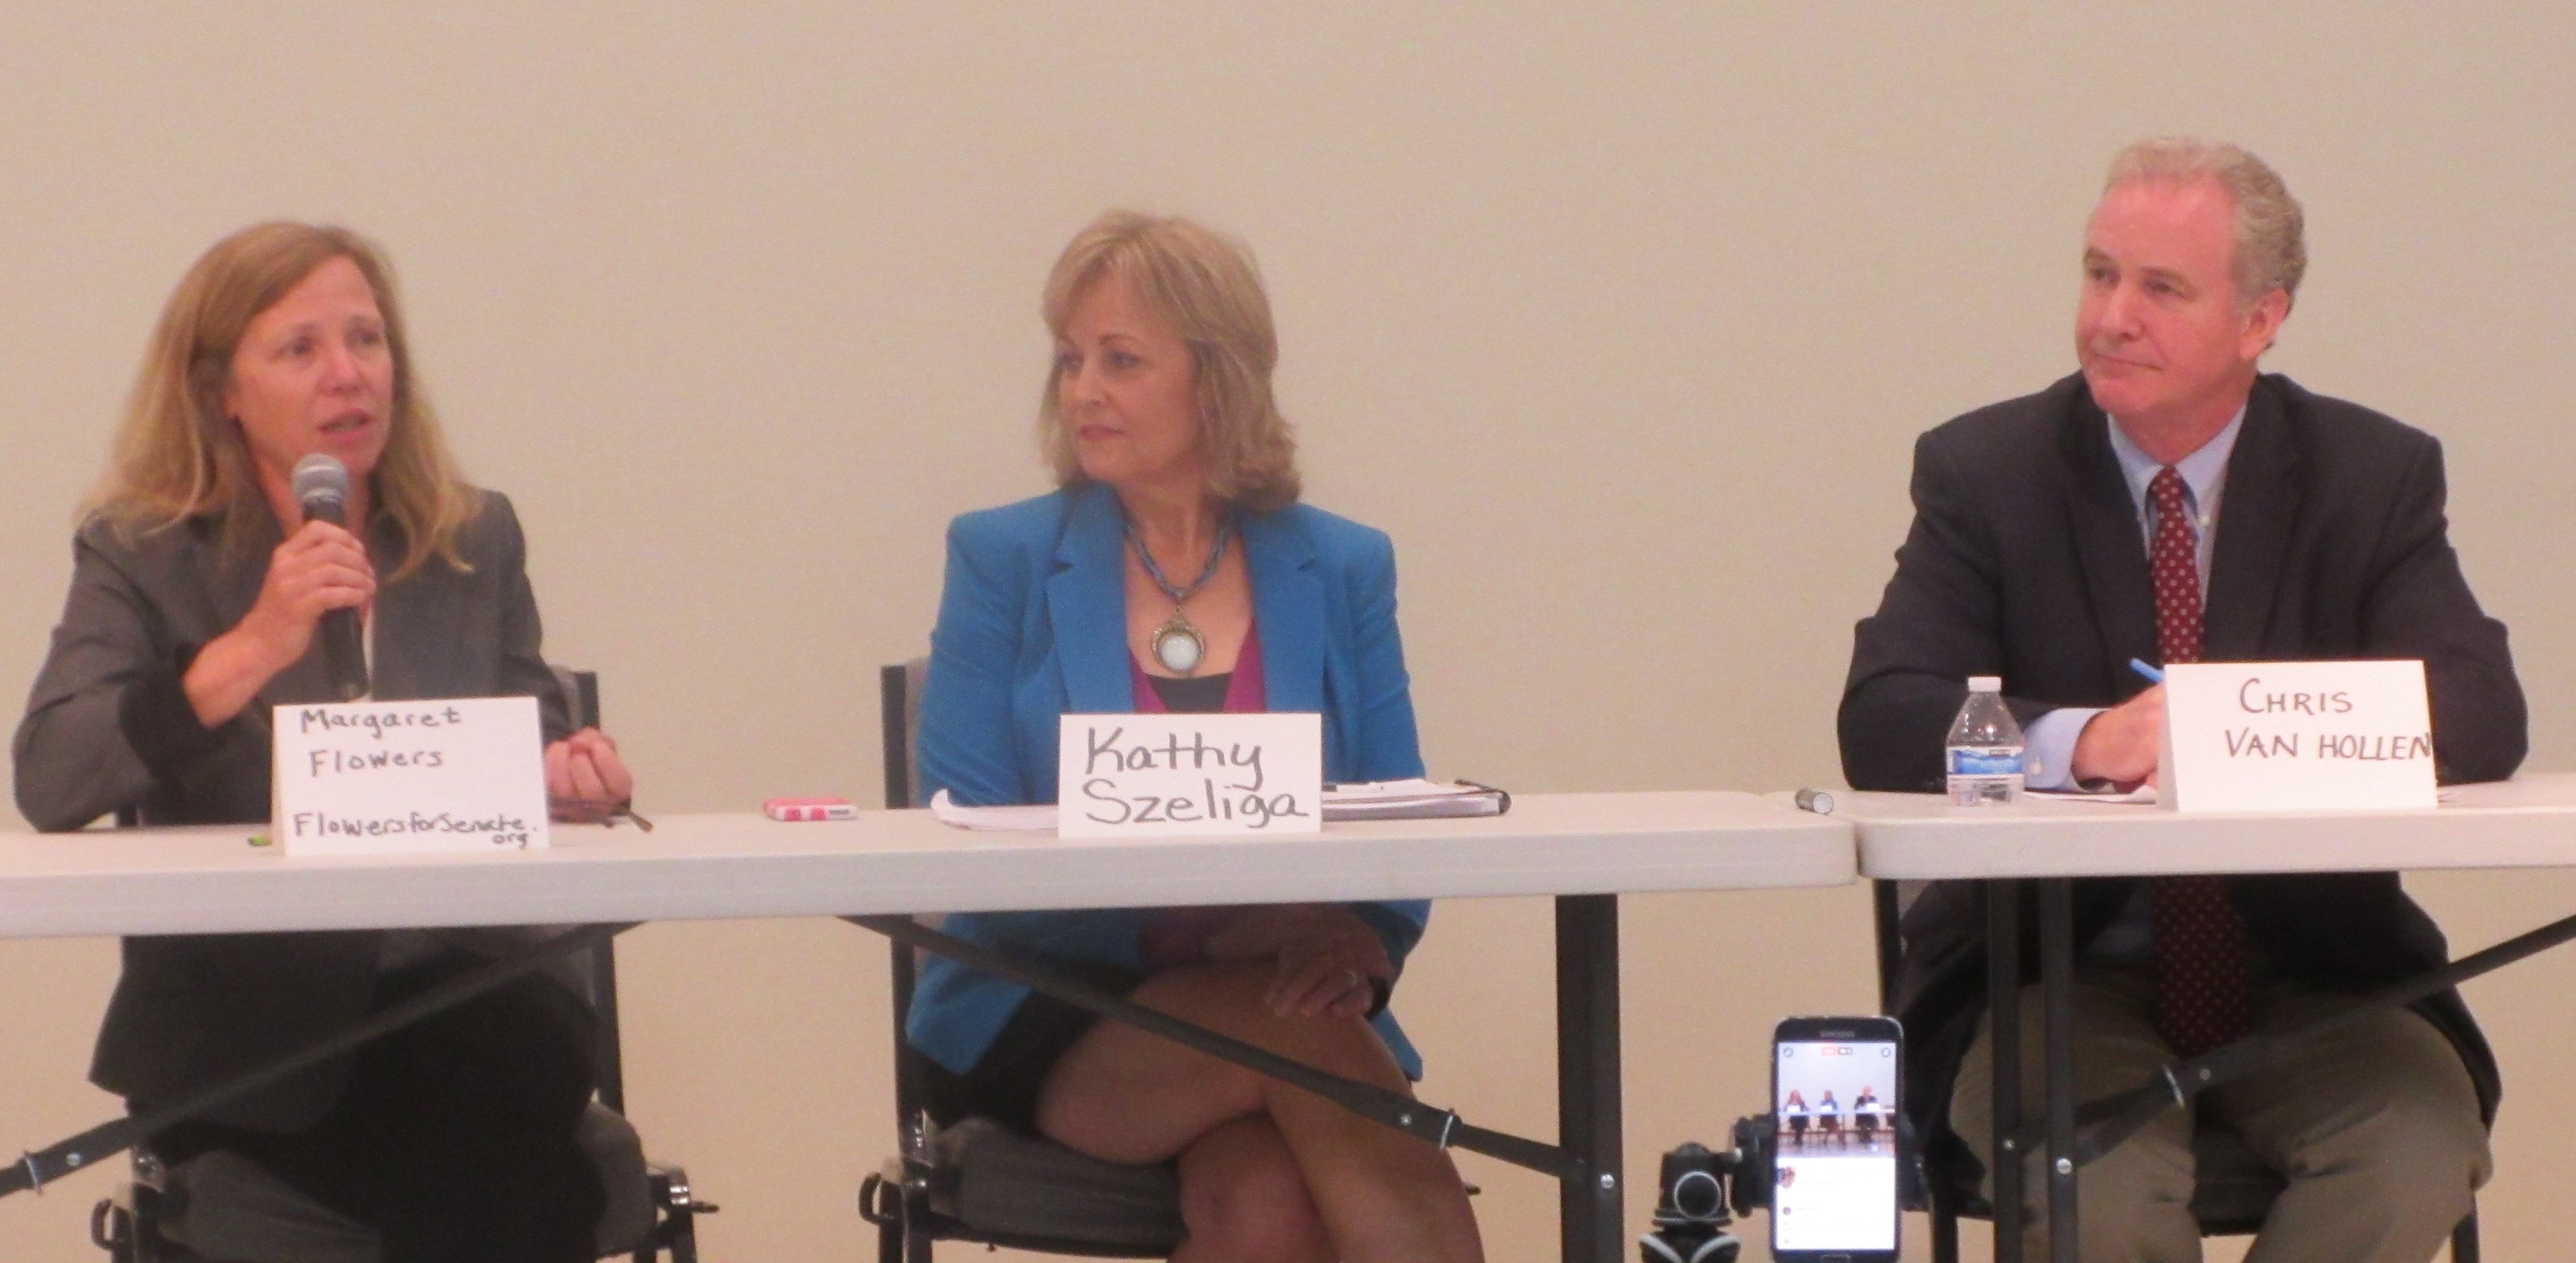 3 Senate candidates together for first forum and maybe last time